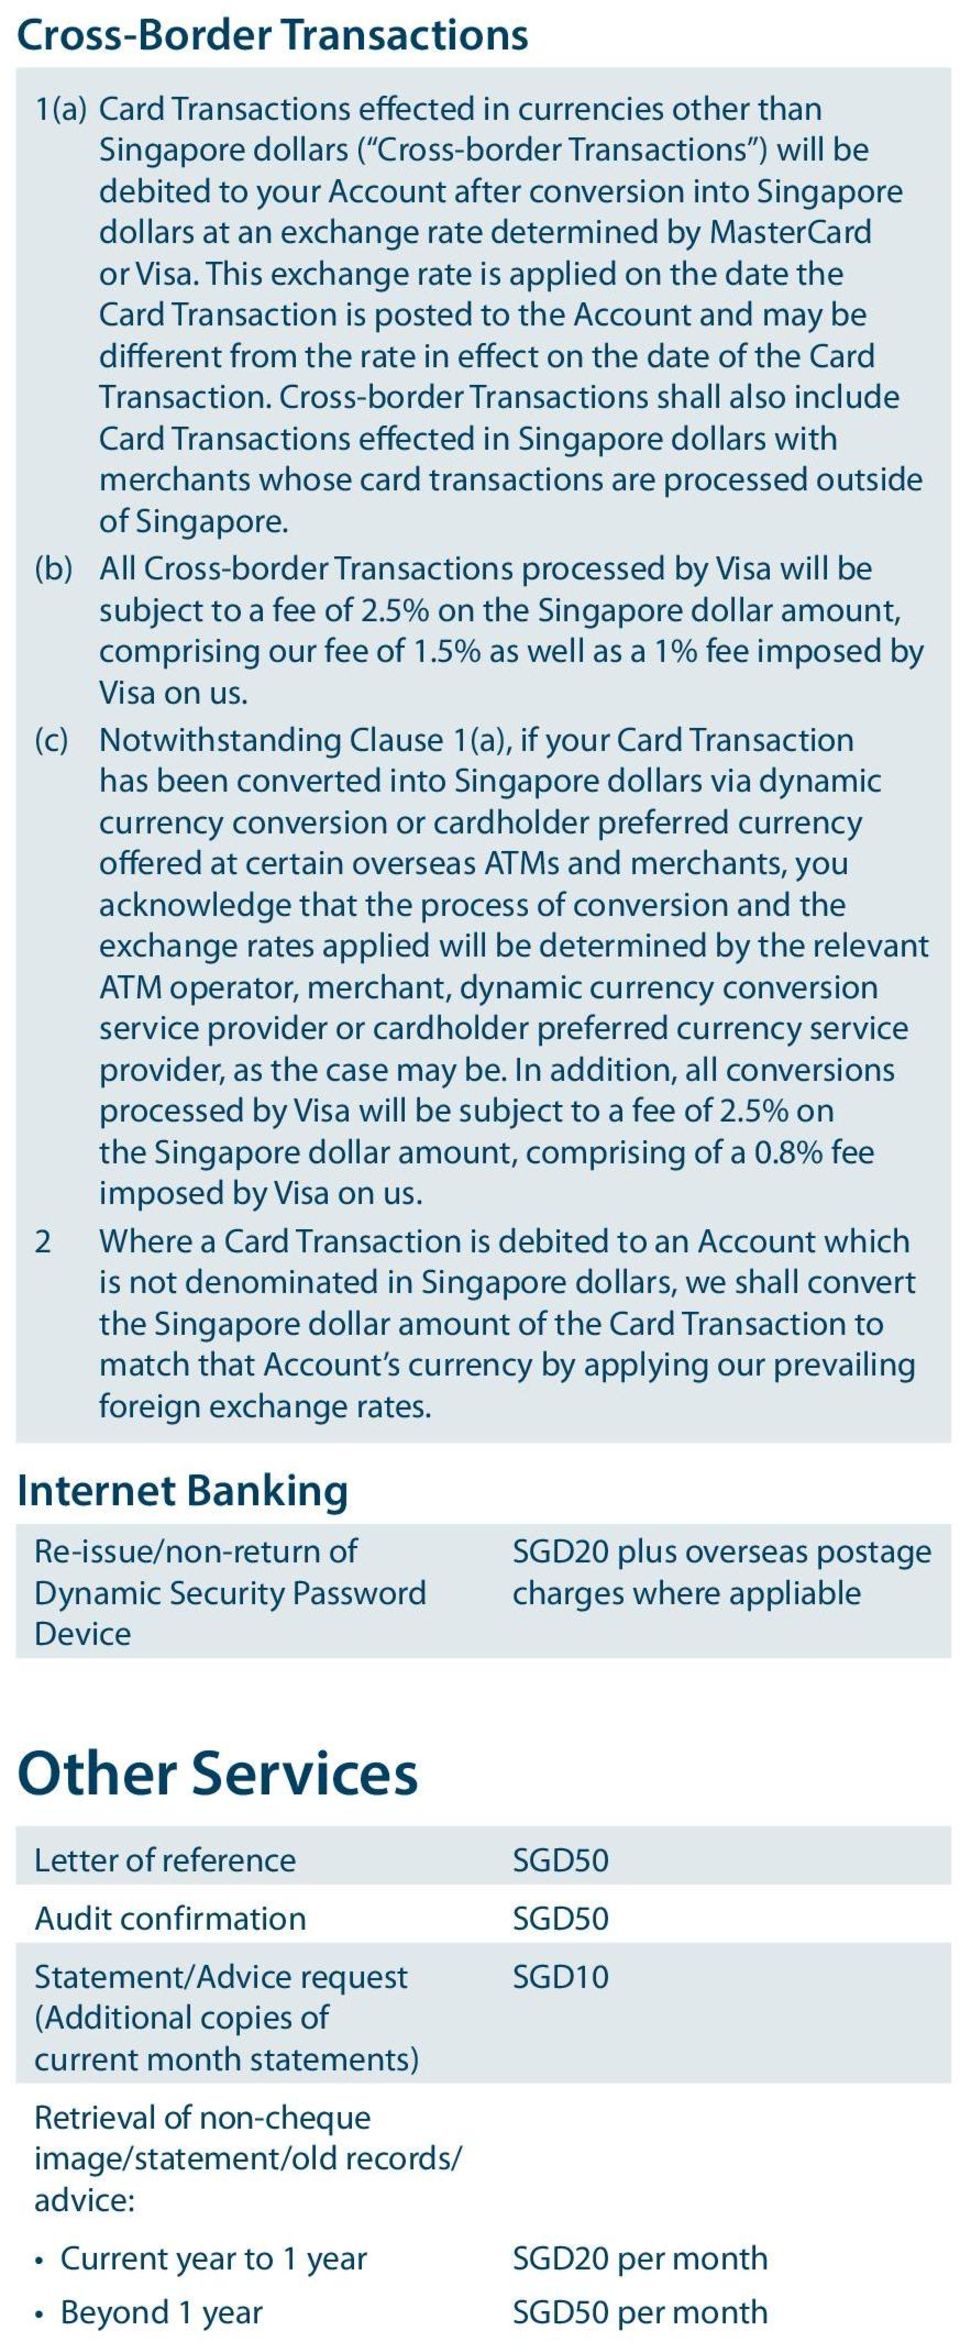 This exchange rate is applied on the date the Card Transaction is posted to the Account and may be different from the rate in effect on the date of the Card Transaction.